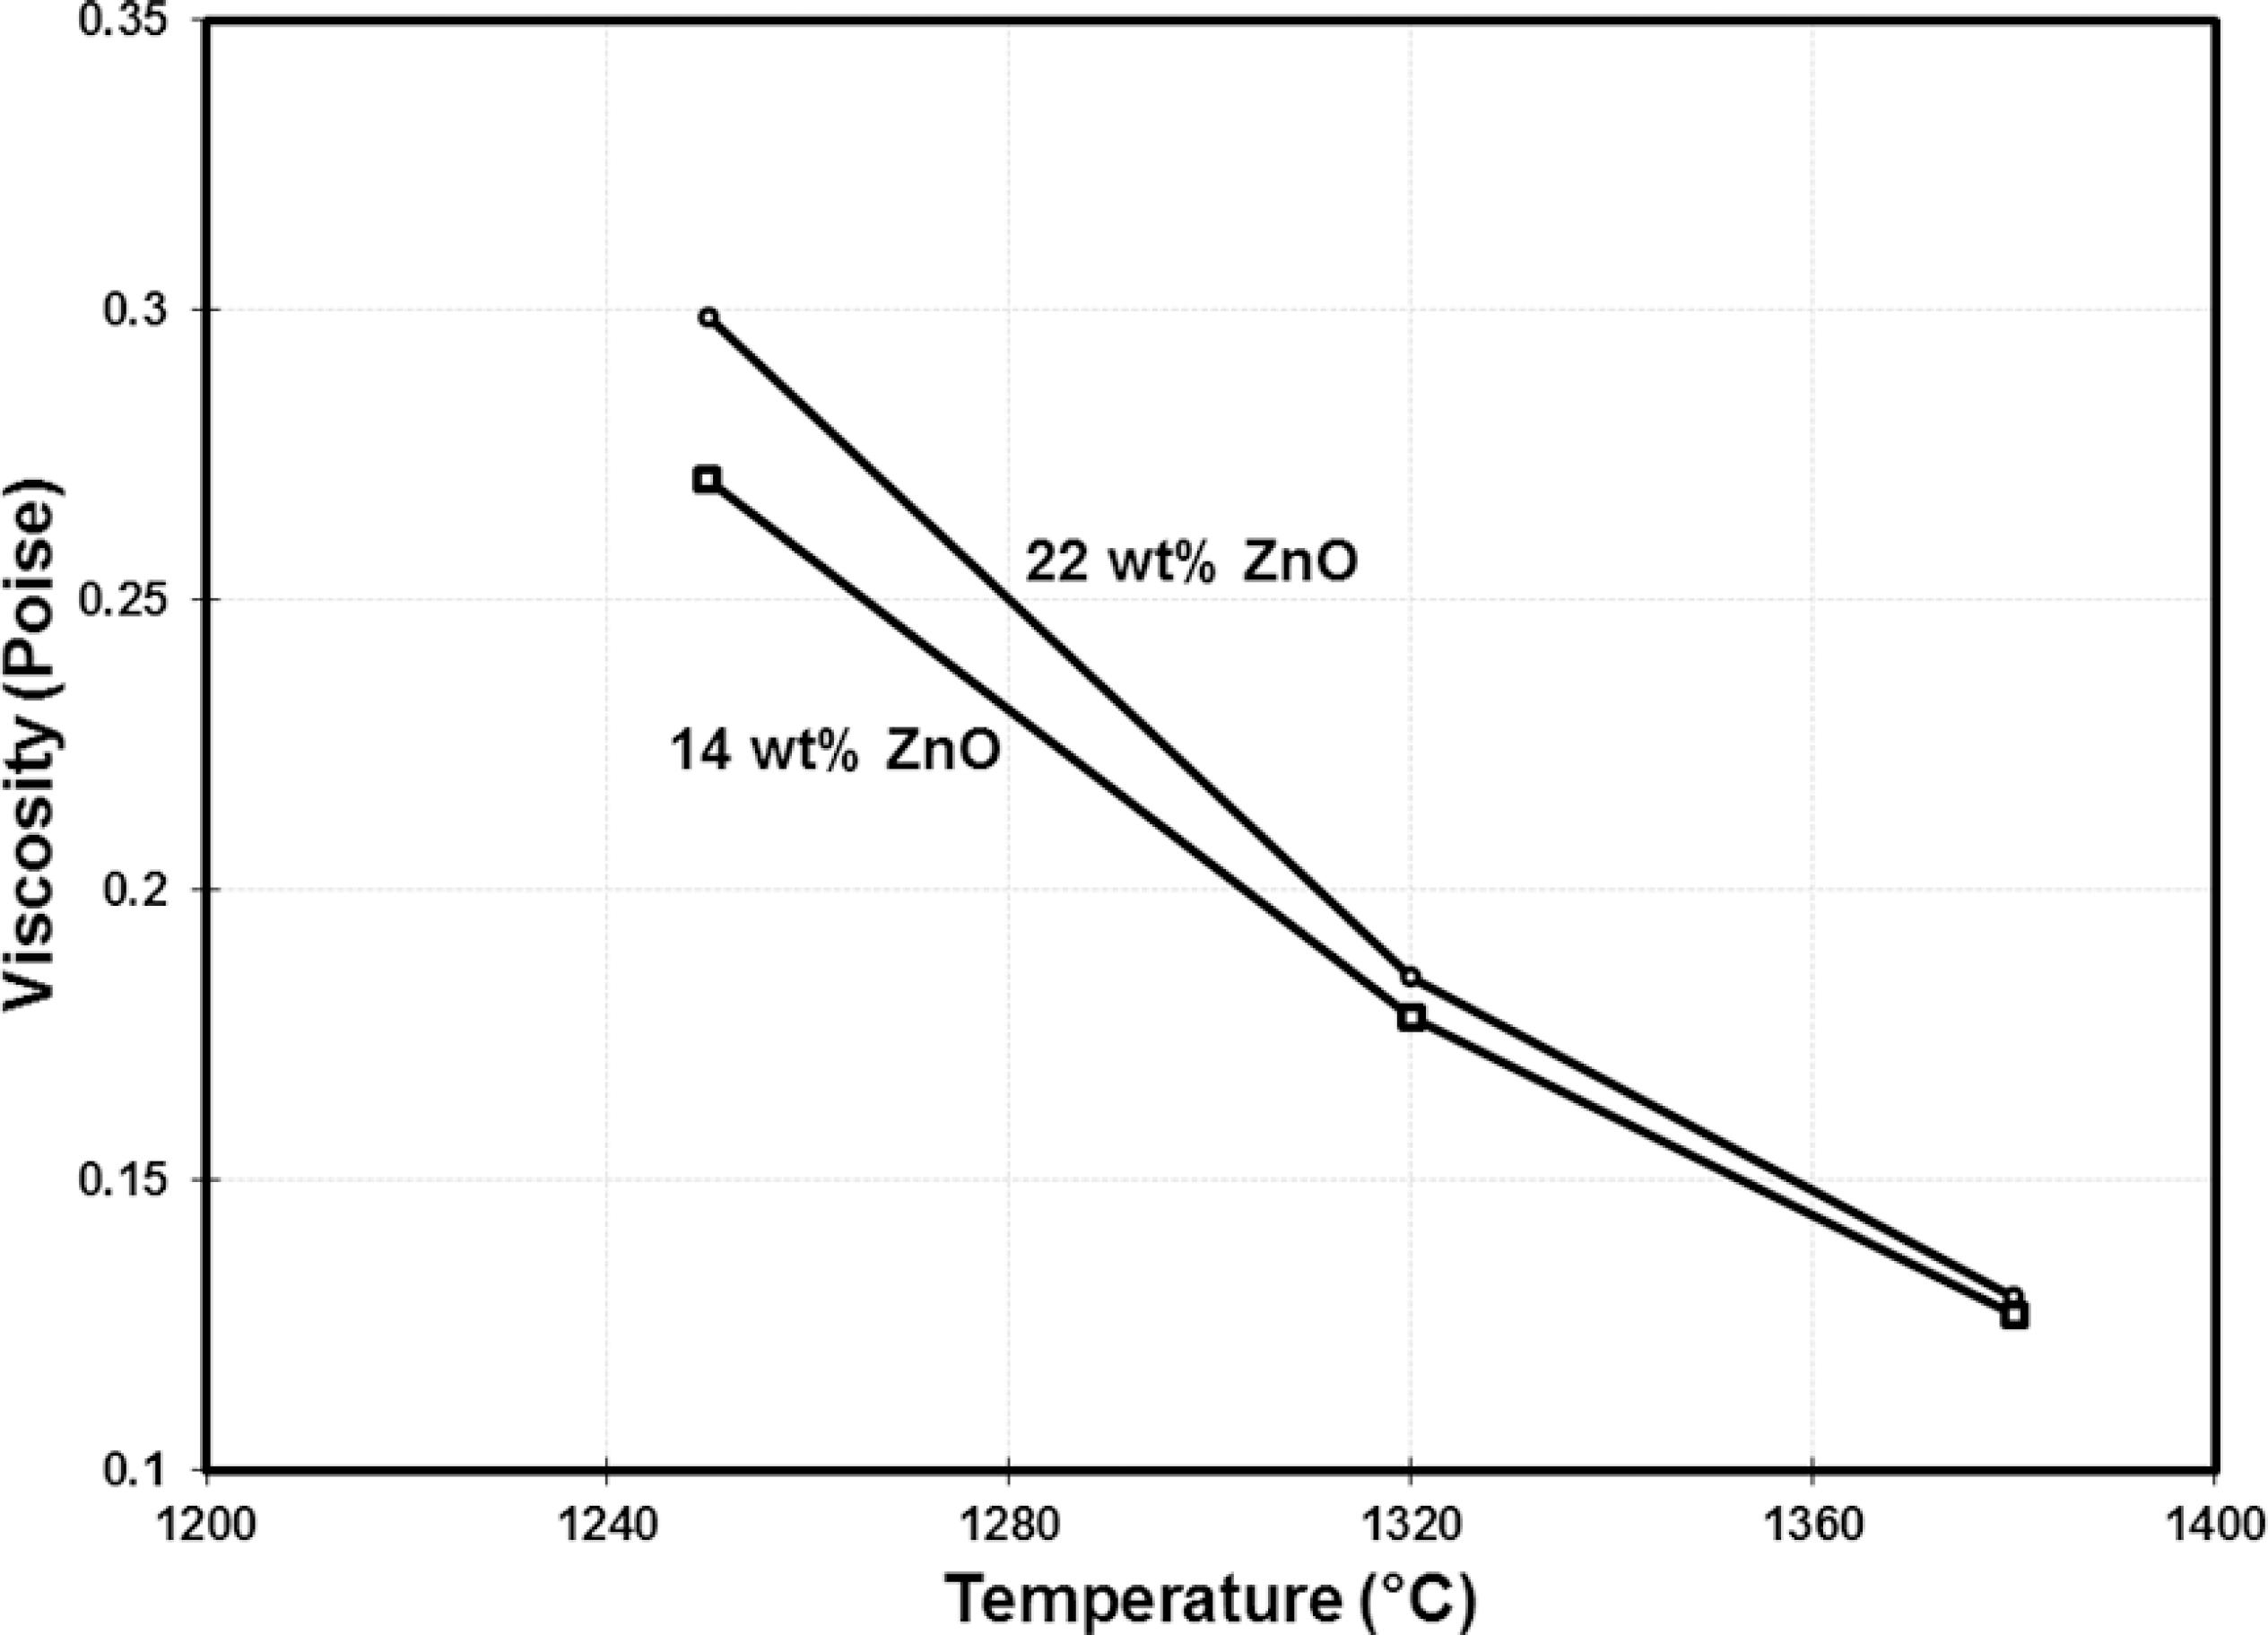 Copper Silver Phase Diagram Phase Diagram Study For The Pbo Zno Cao Sio2 Fe2o3 System In Air